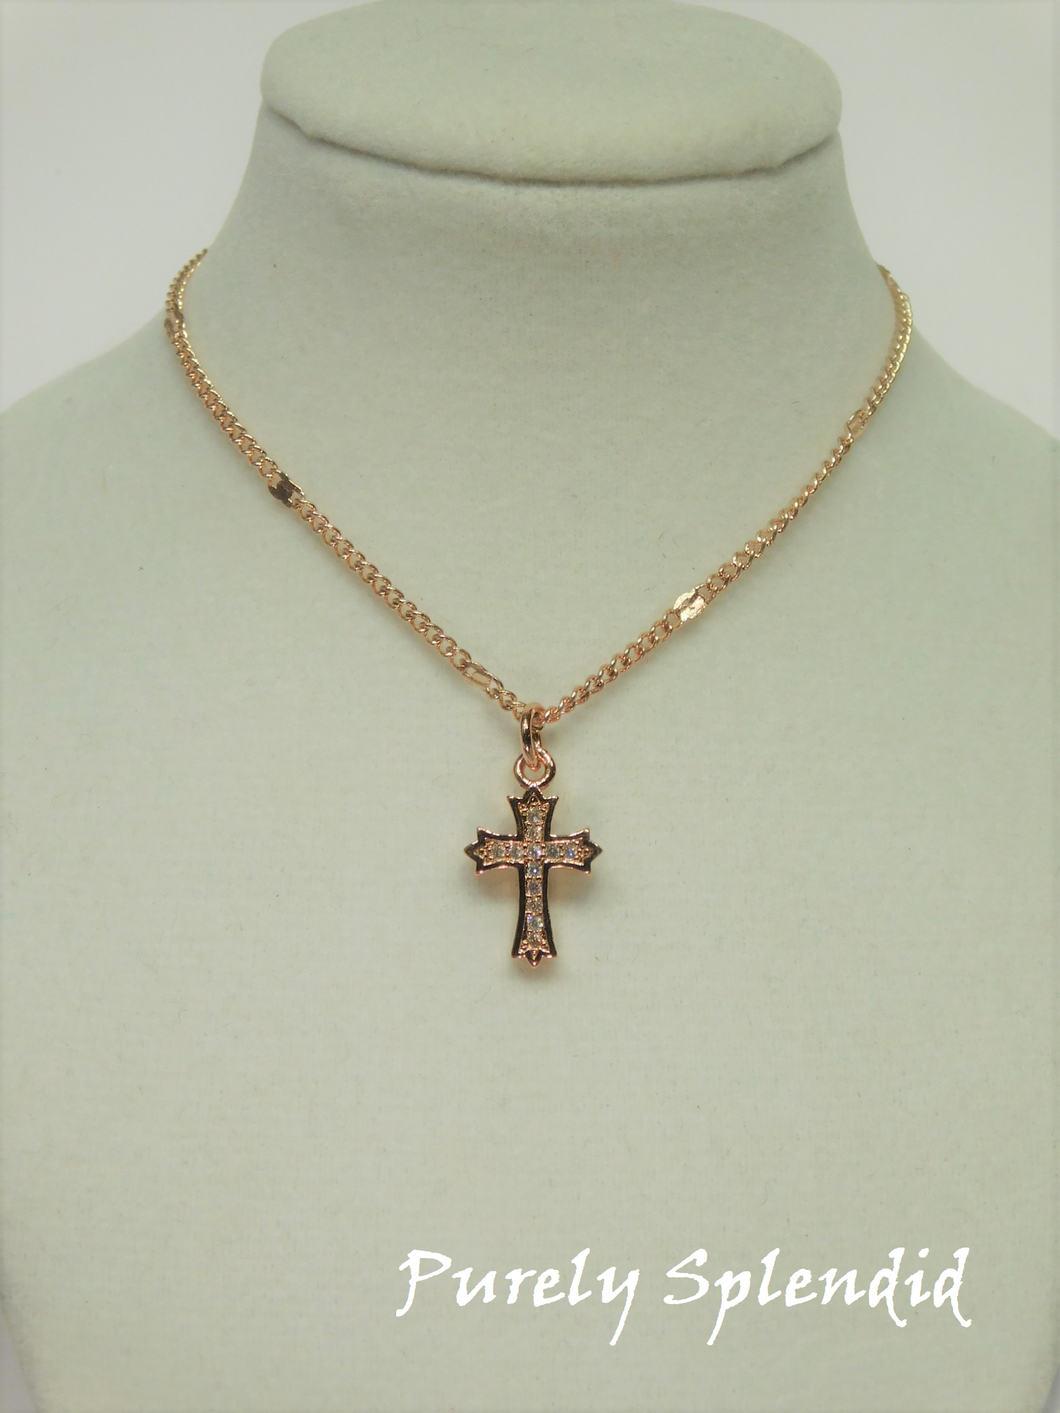 beautiful Rose Gold Cross Necklace with tiny Cubic Zirconia sparkles, hanging from a pretty rose gold chain